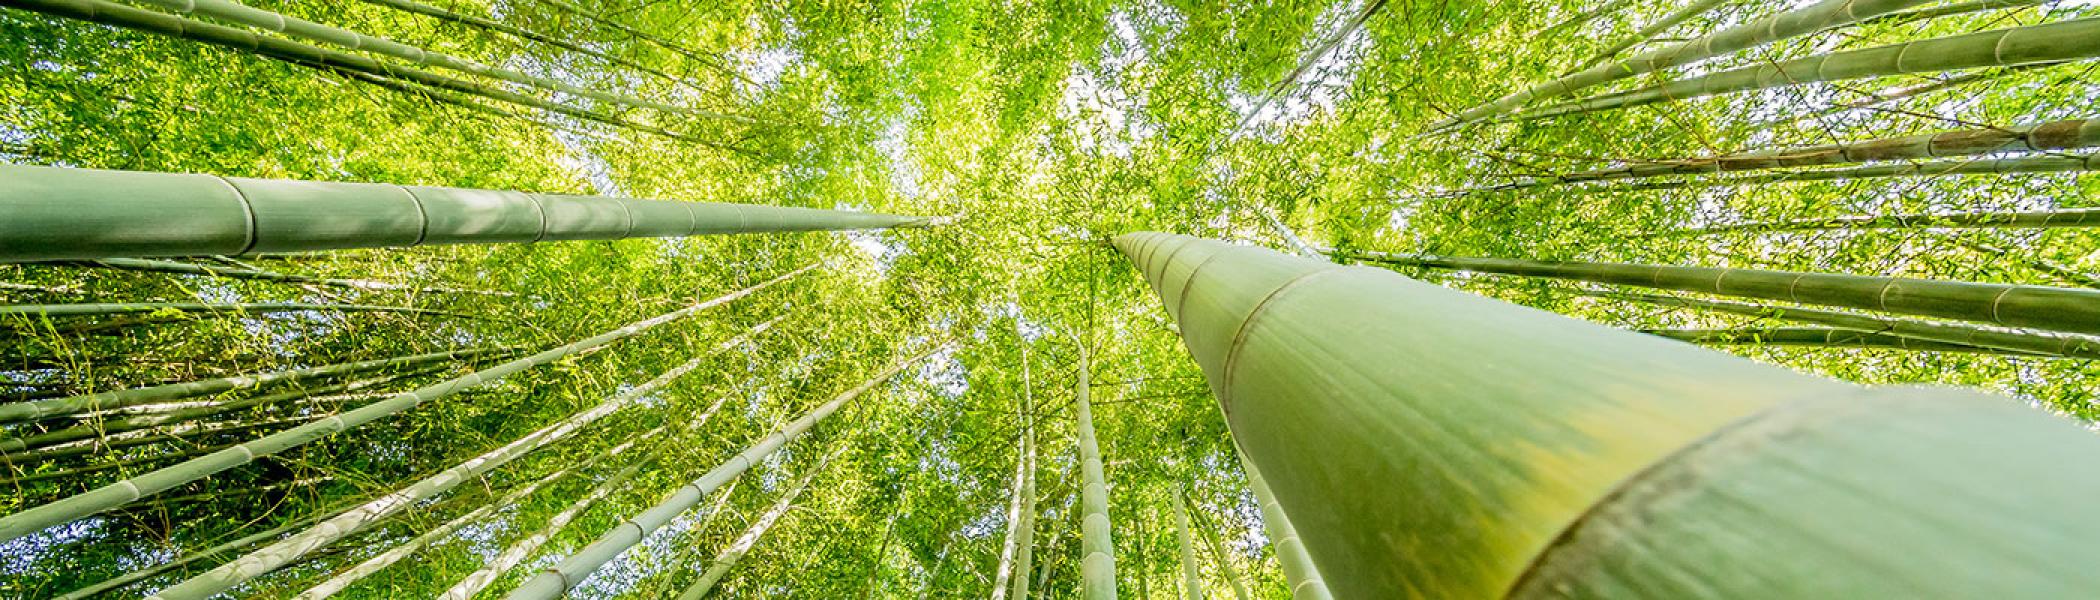 Green bamboo shoots reaching to the sky